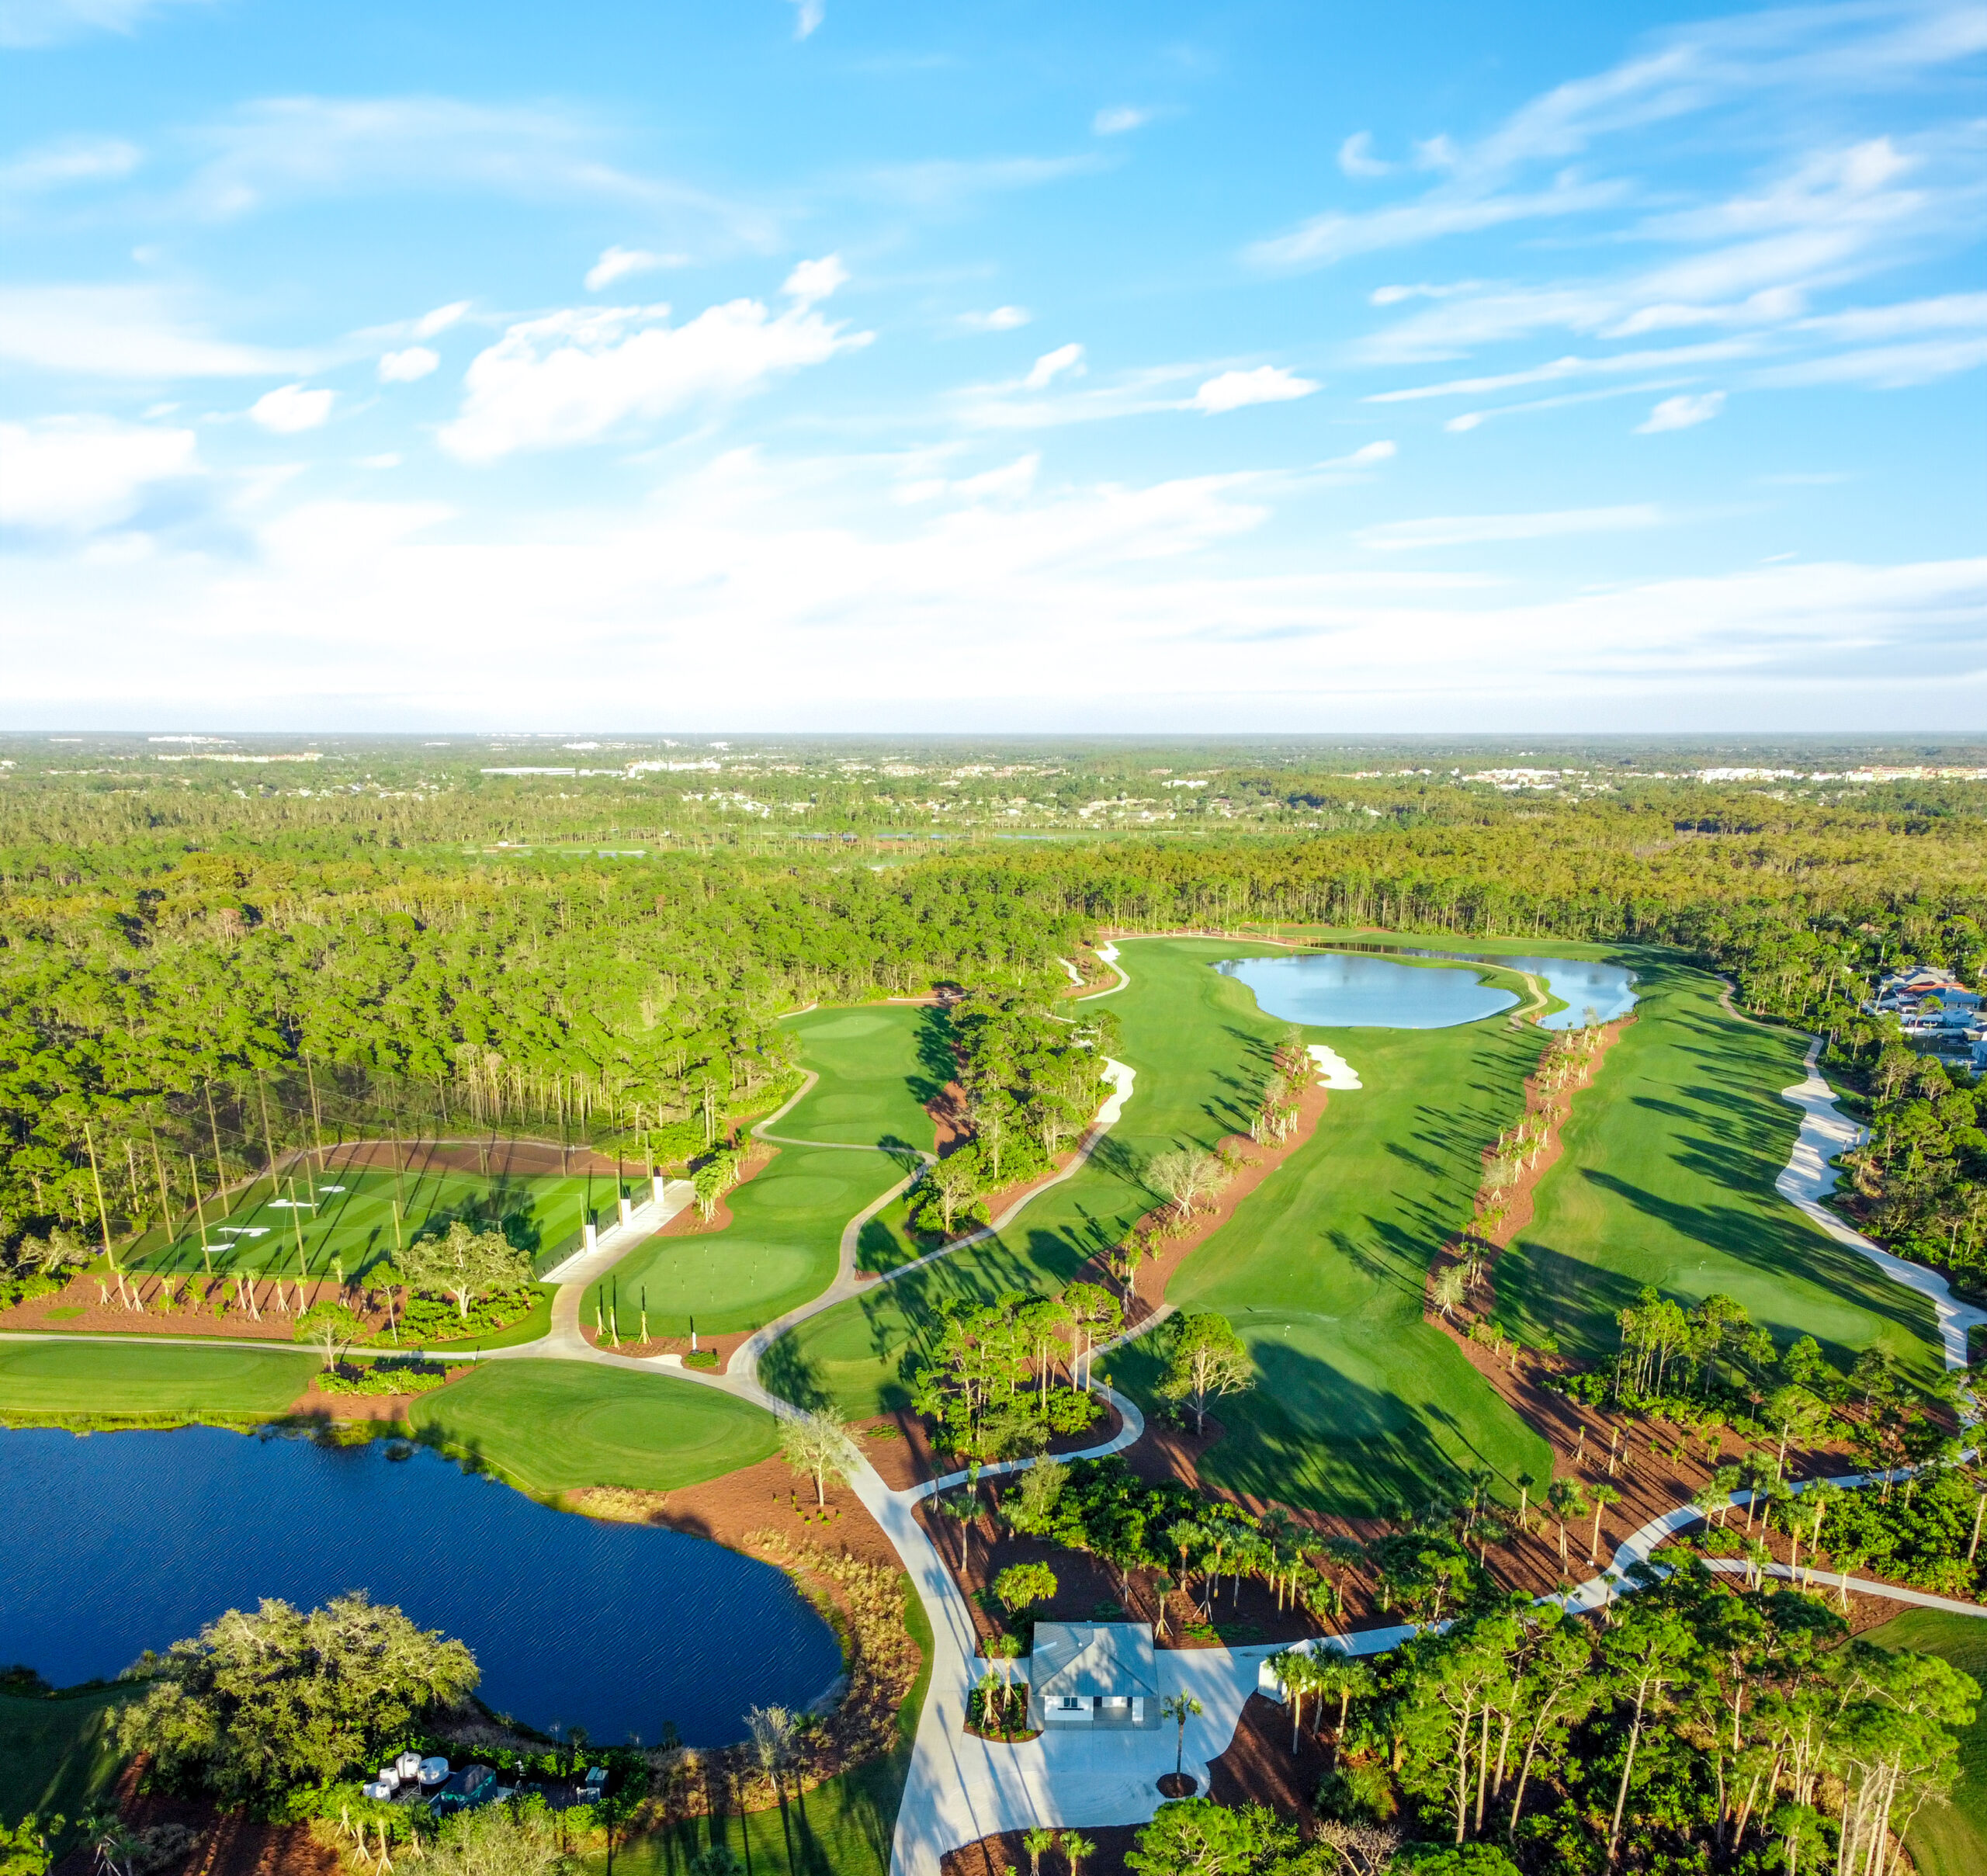 An aerial view of the championship golf course in Bonita Springs.